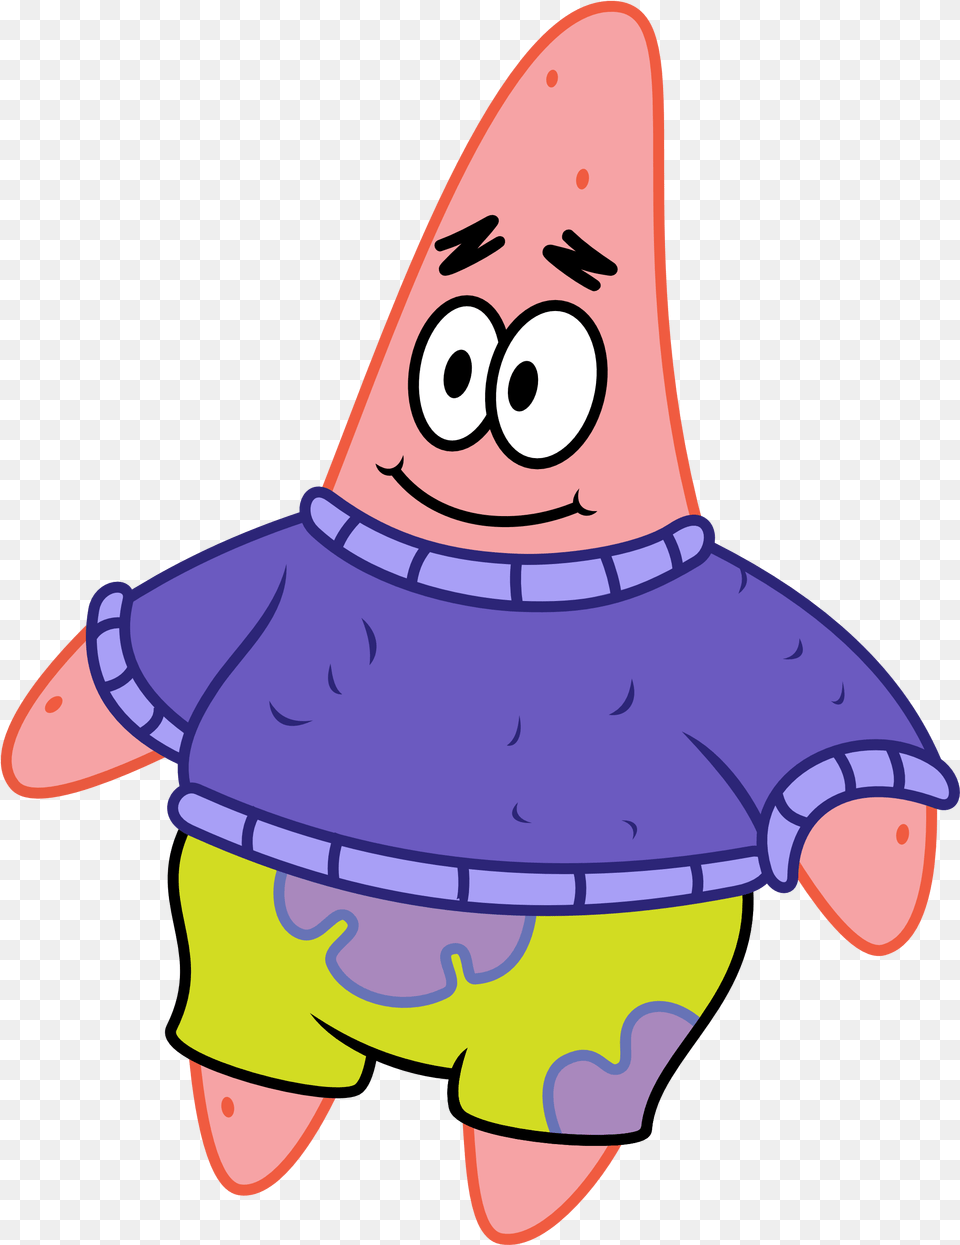 Hd Vector Of Sweater Patrick Patrick Star With Sweater, Animal, Fish, Sea Life, Shark Free Png